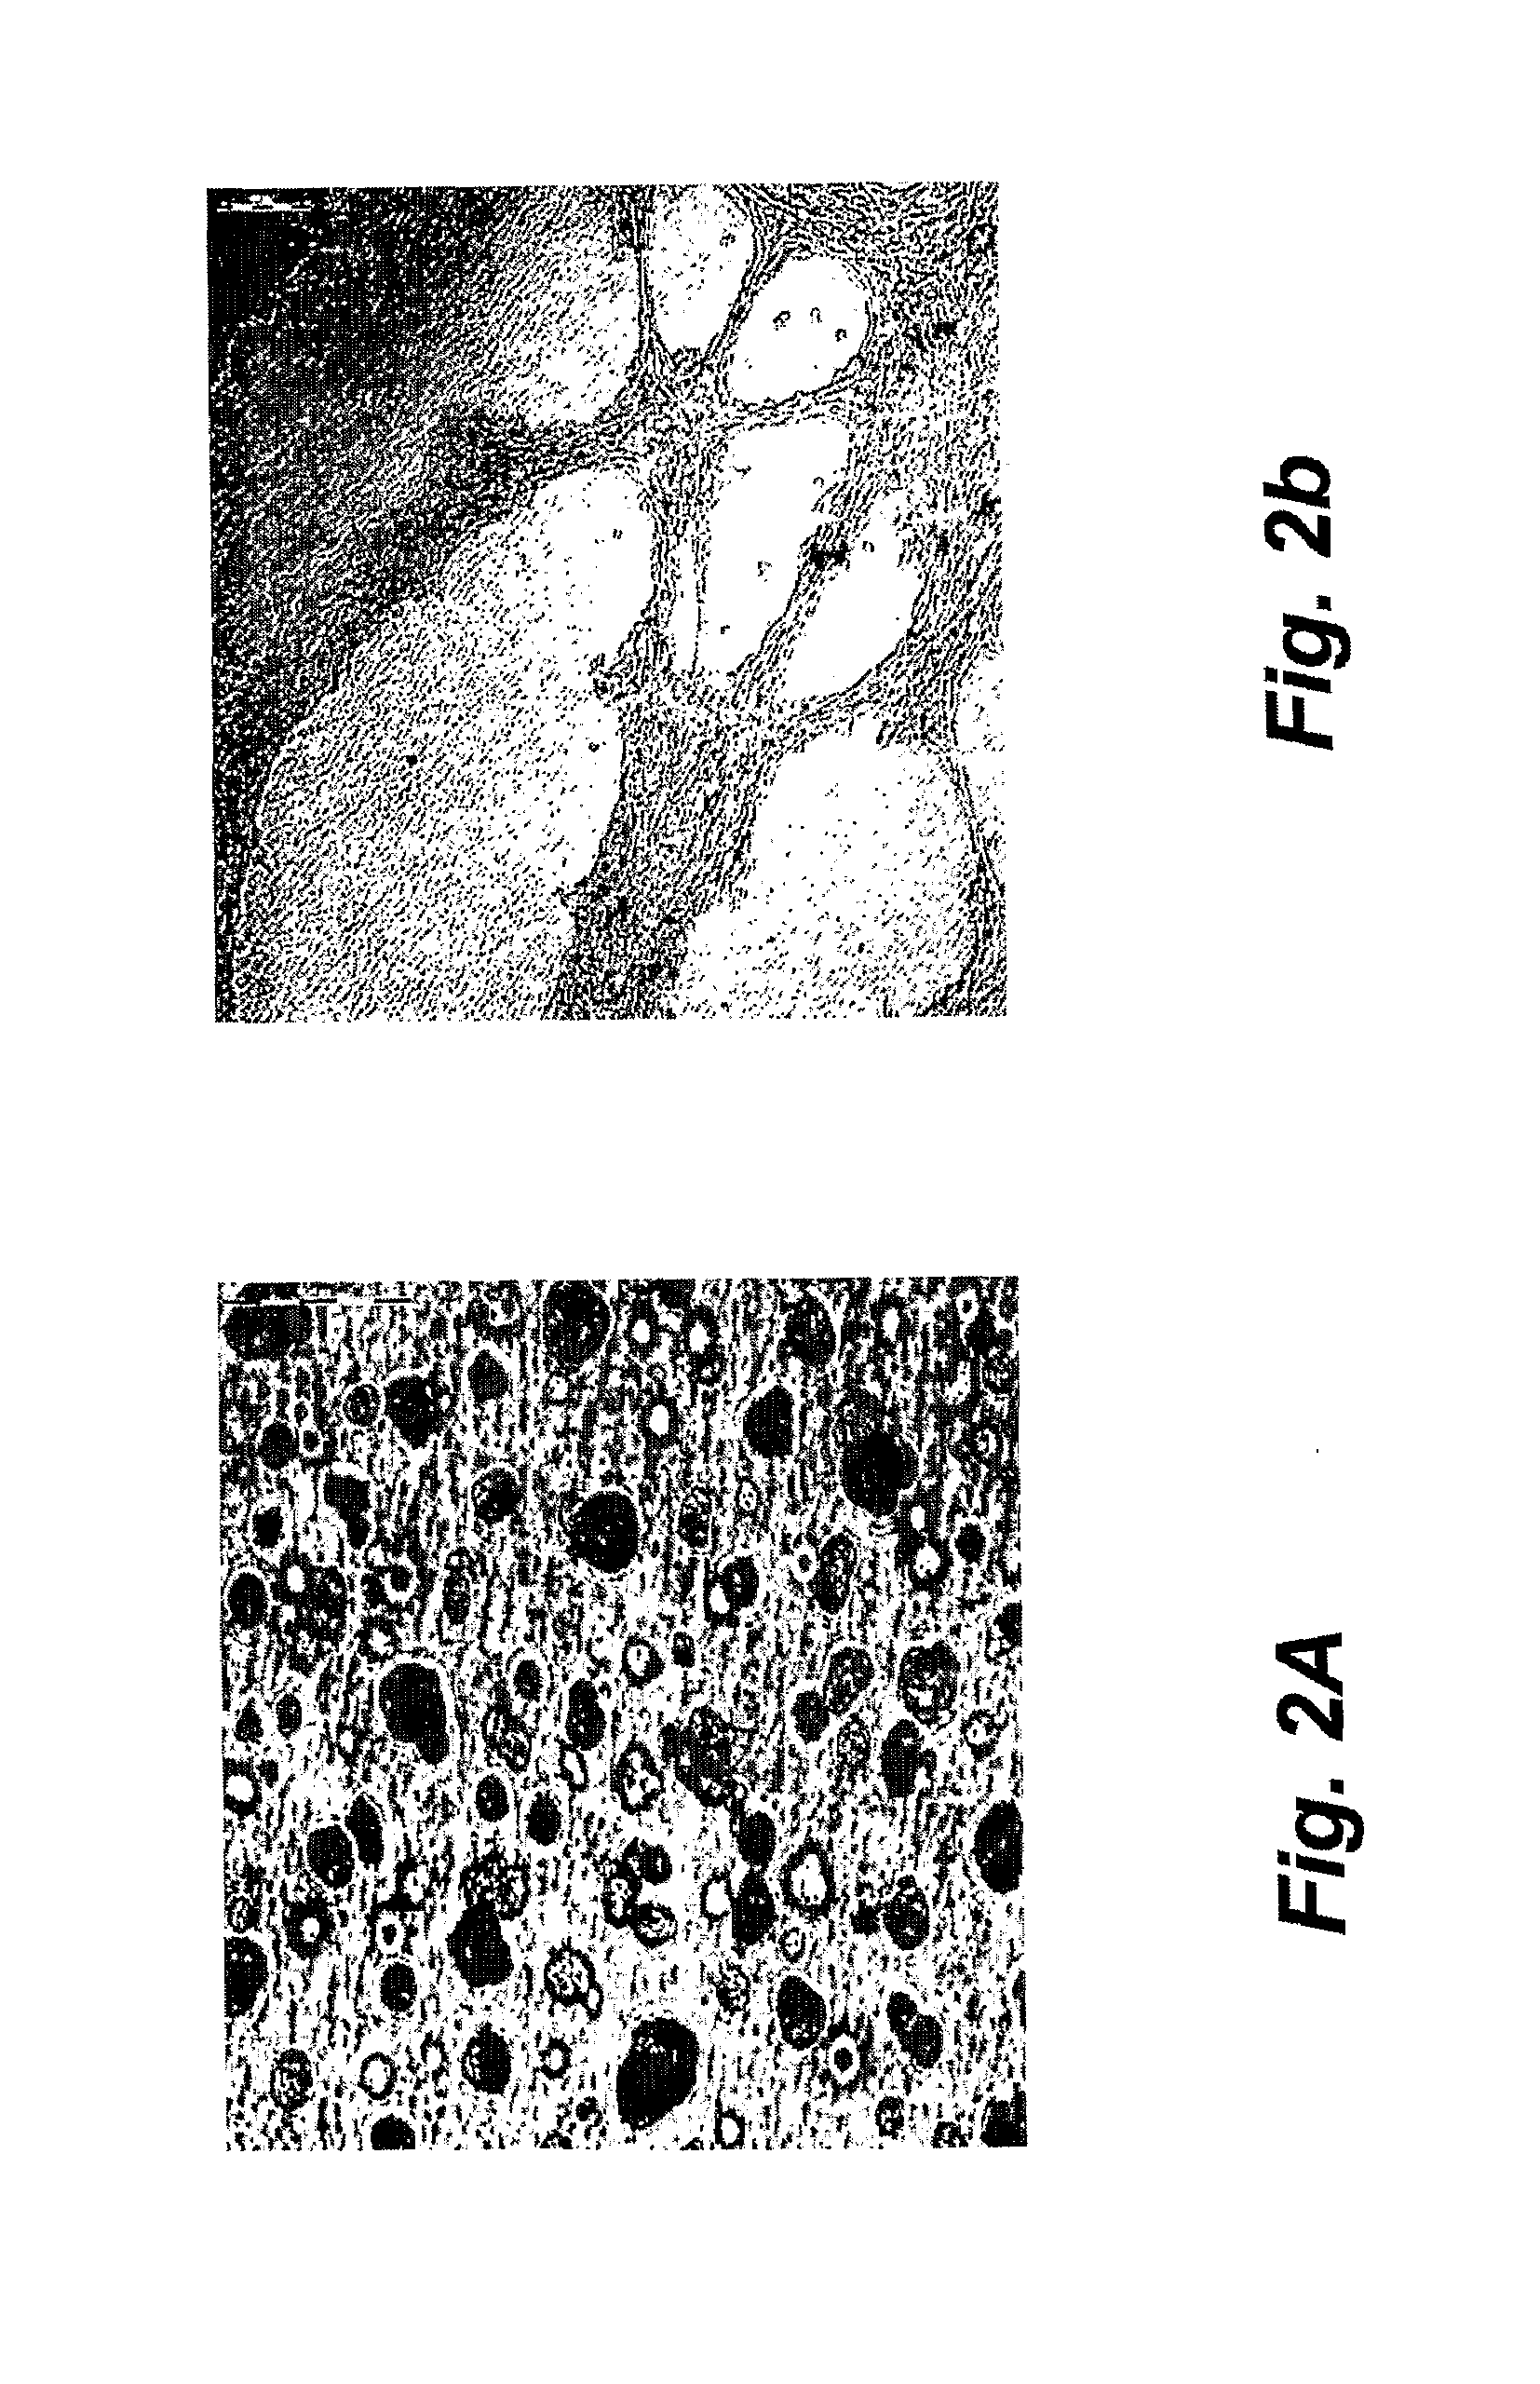 Method and means for culturing osteoblastic cells